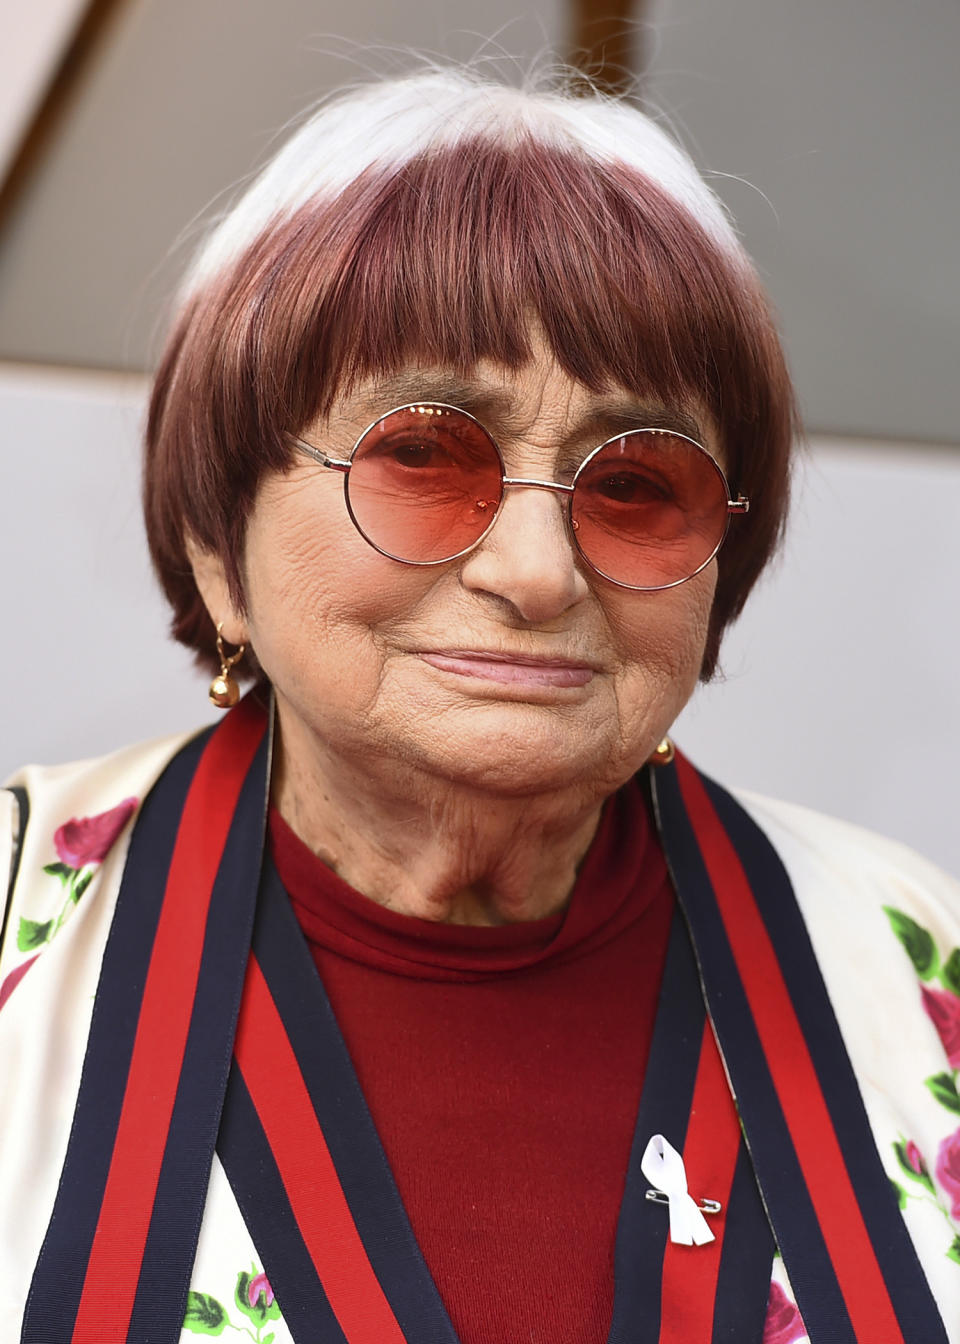 Filmmaker Agnes Varda arrives at the Oscars in Los Angeles on March 4, 2018. The French New Wave pioneer who for decades beguiled, challenged and charmed moviegoers, died of cancer on March 29. She was 90. (Photo by Jordan Strauss/Invision/AP)